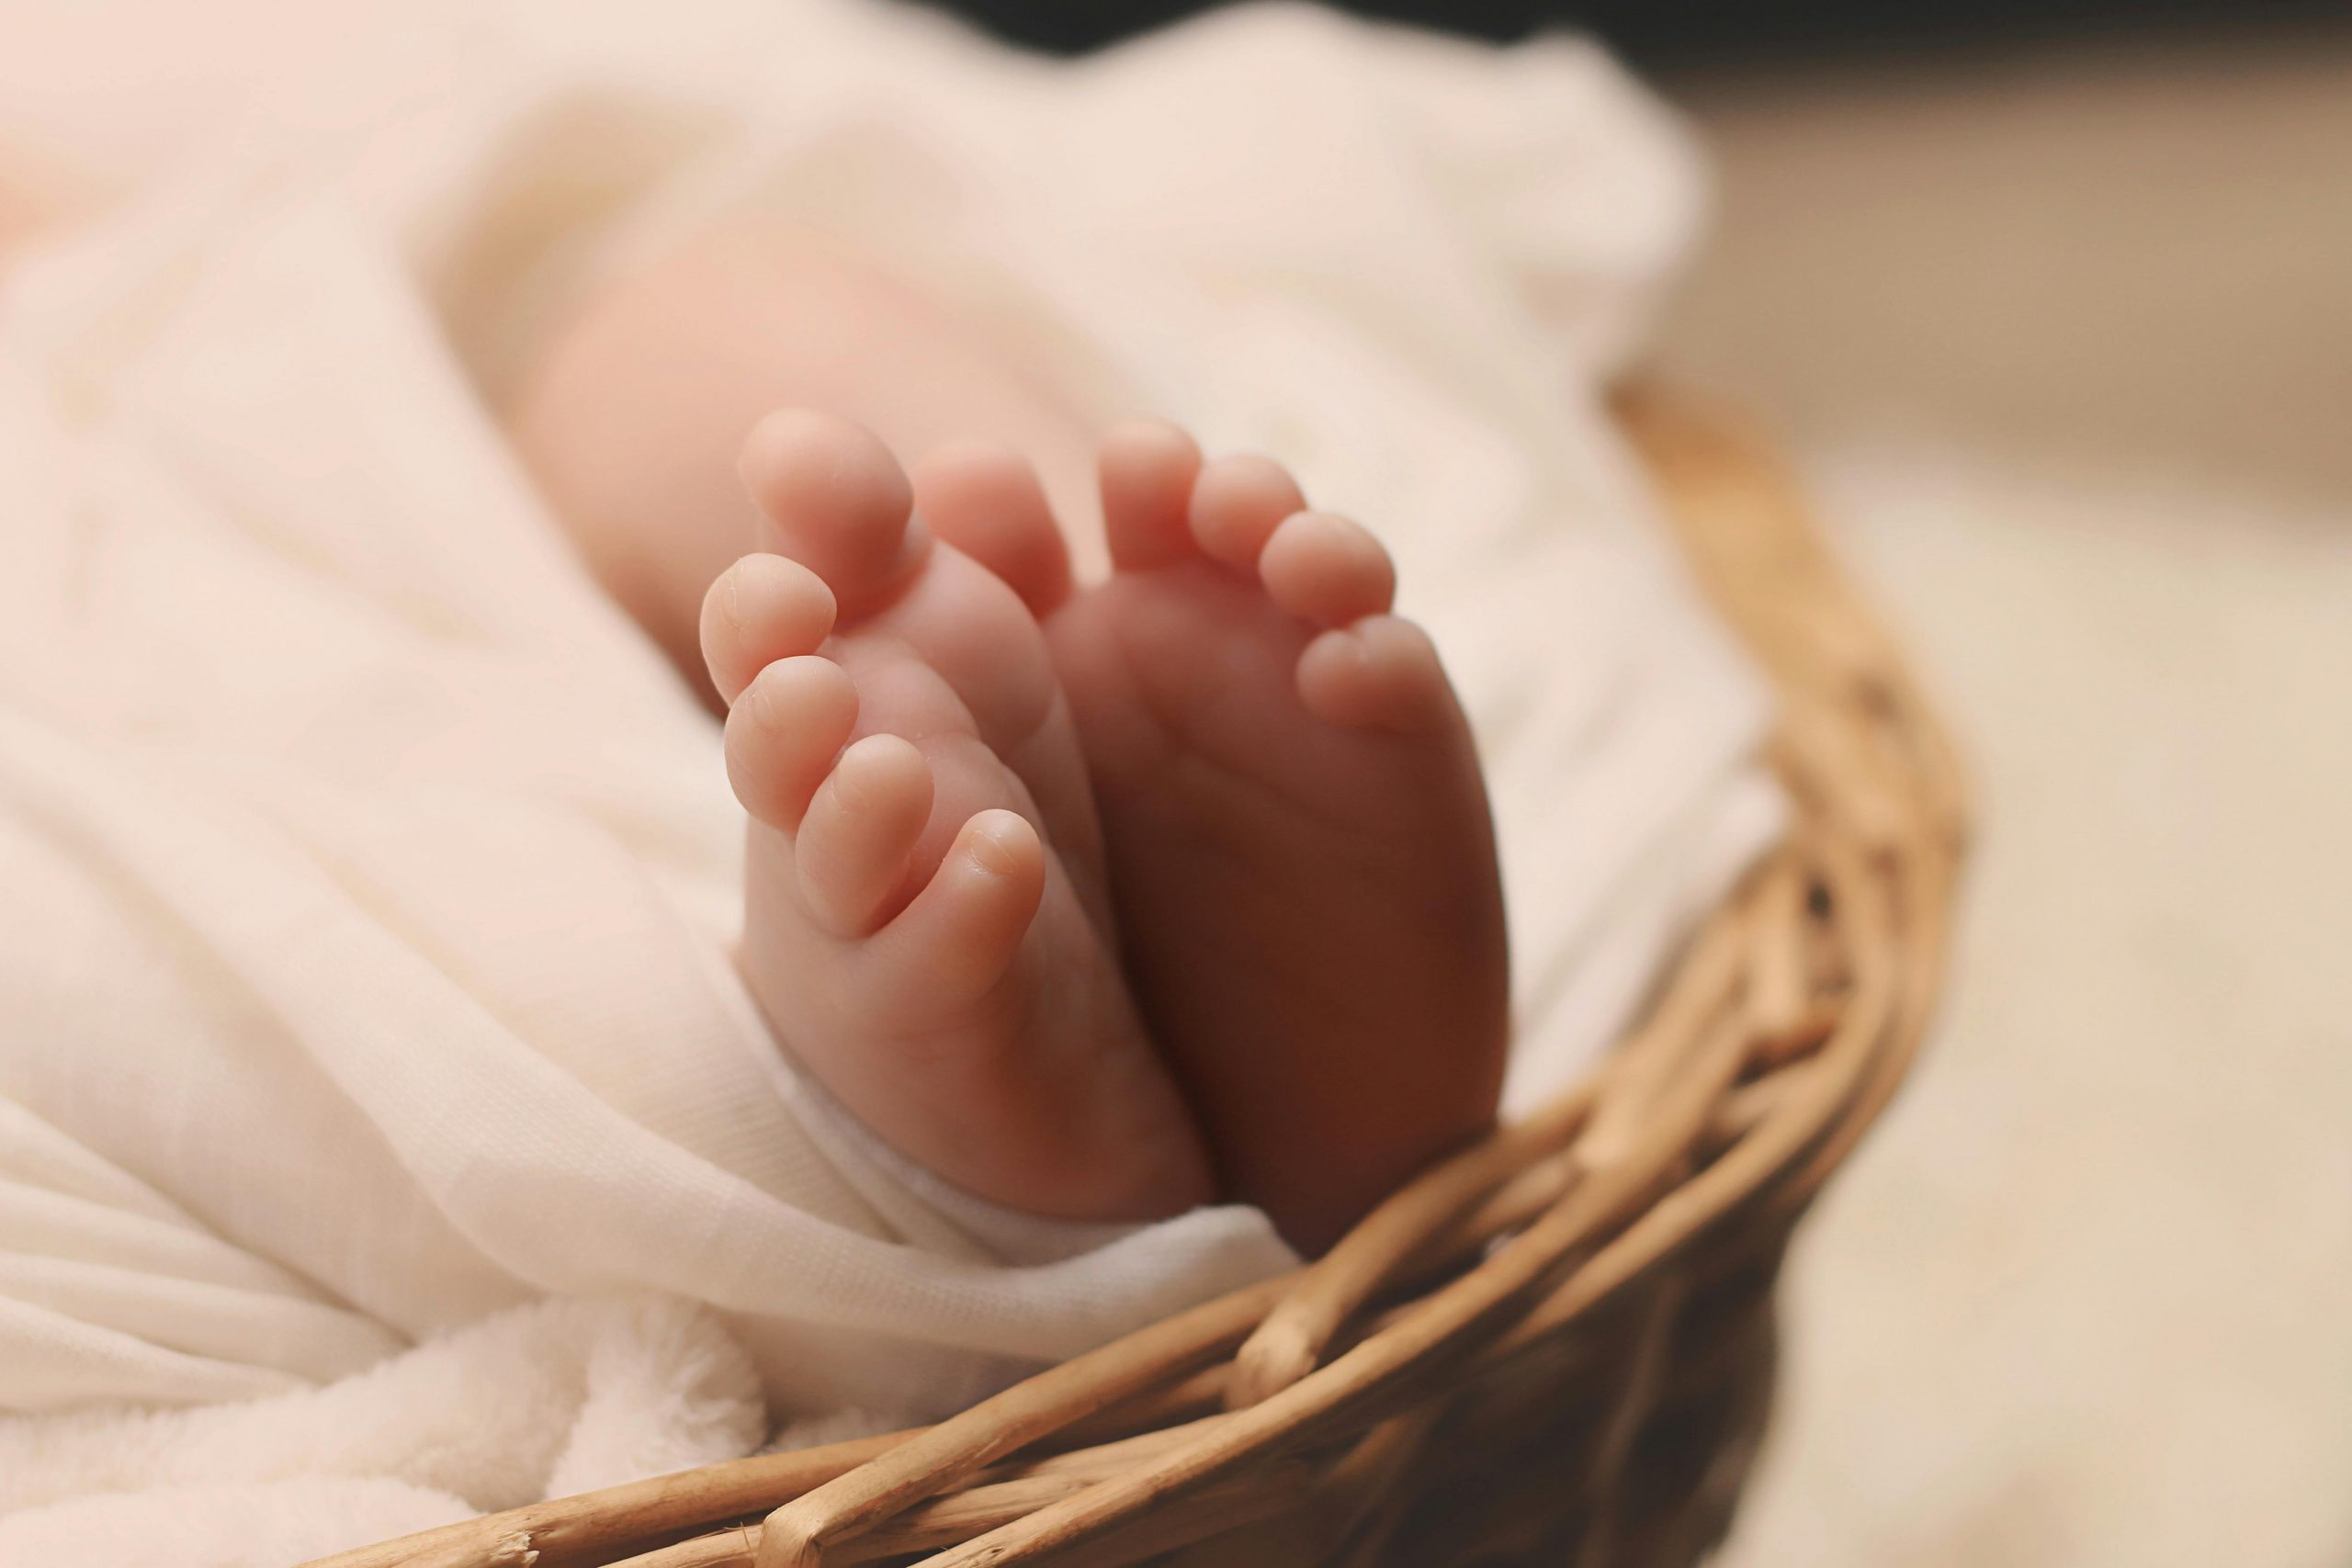 Commercial Surrogacy and Modern-Day Slavery: Guest Column